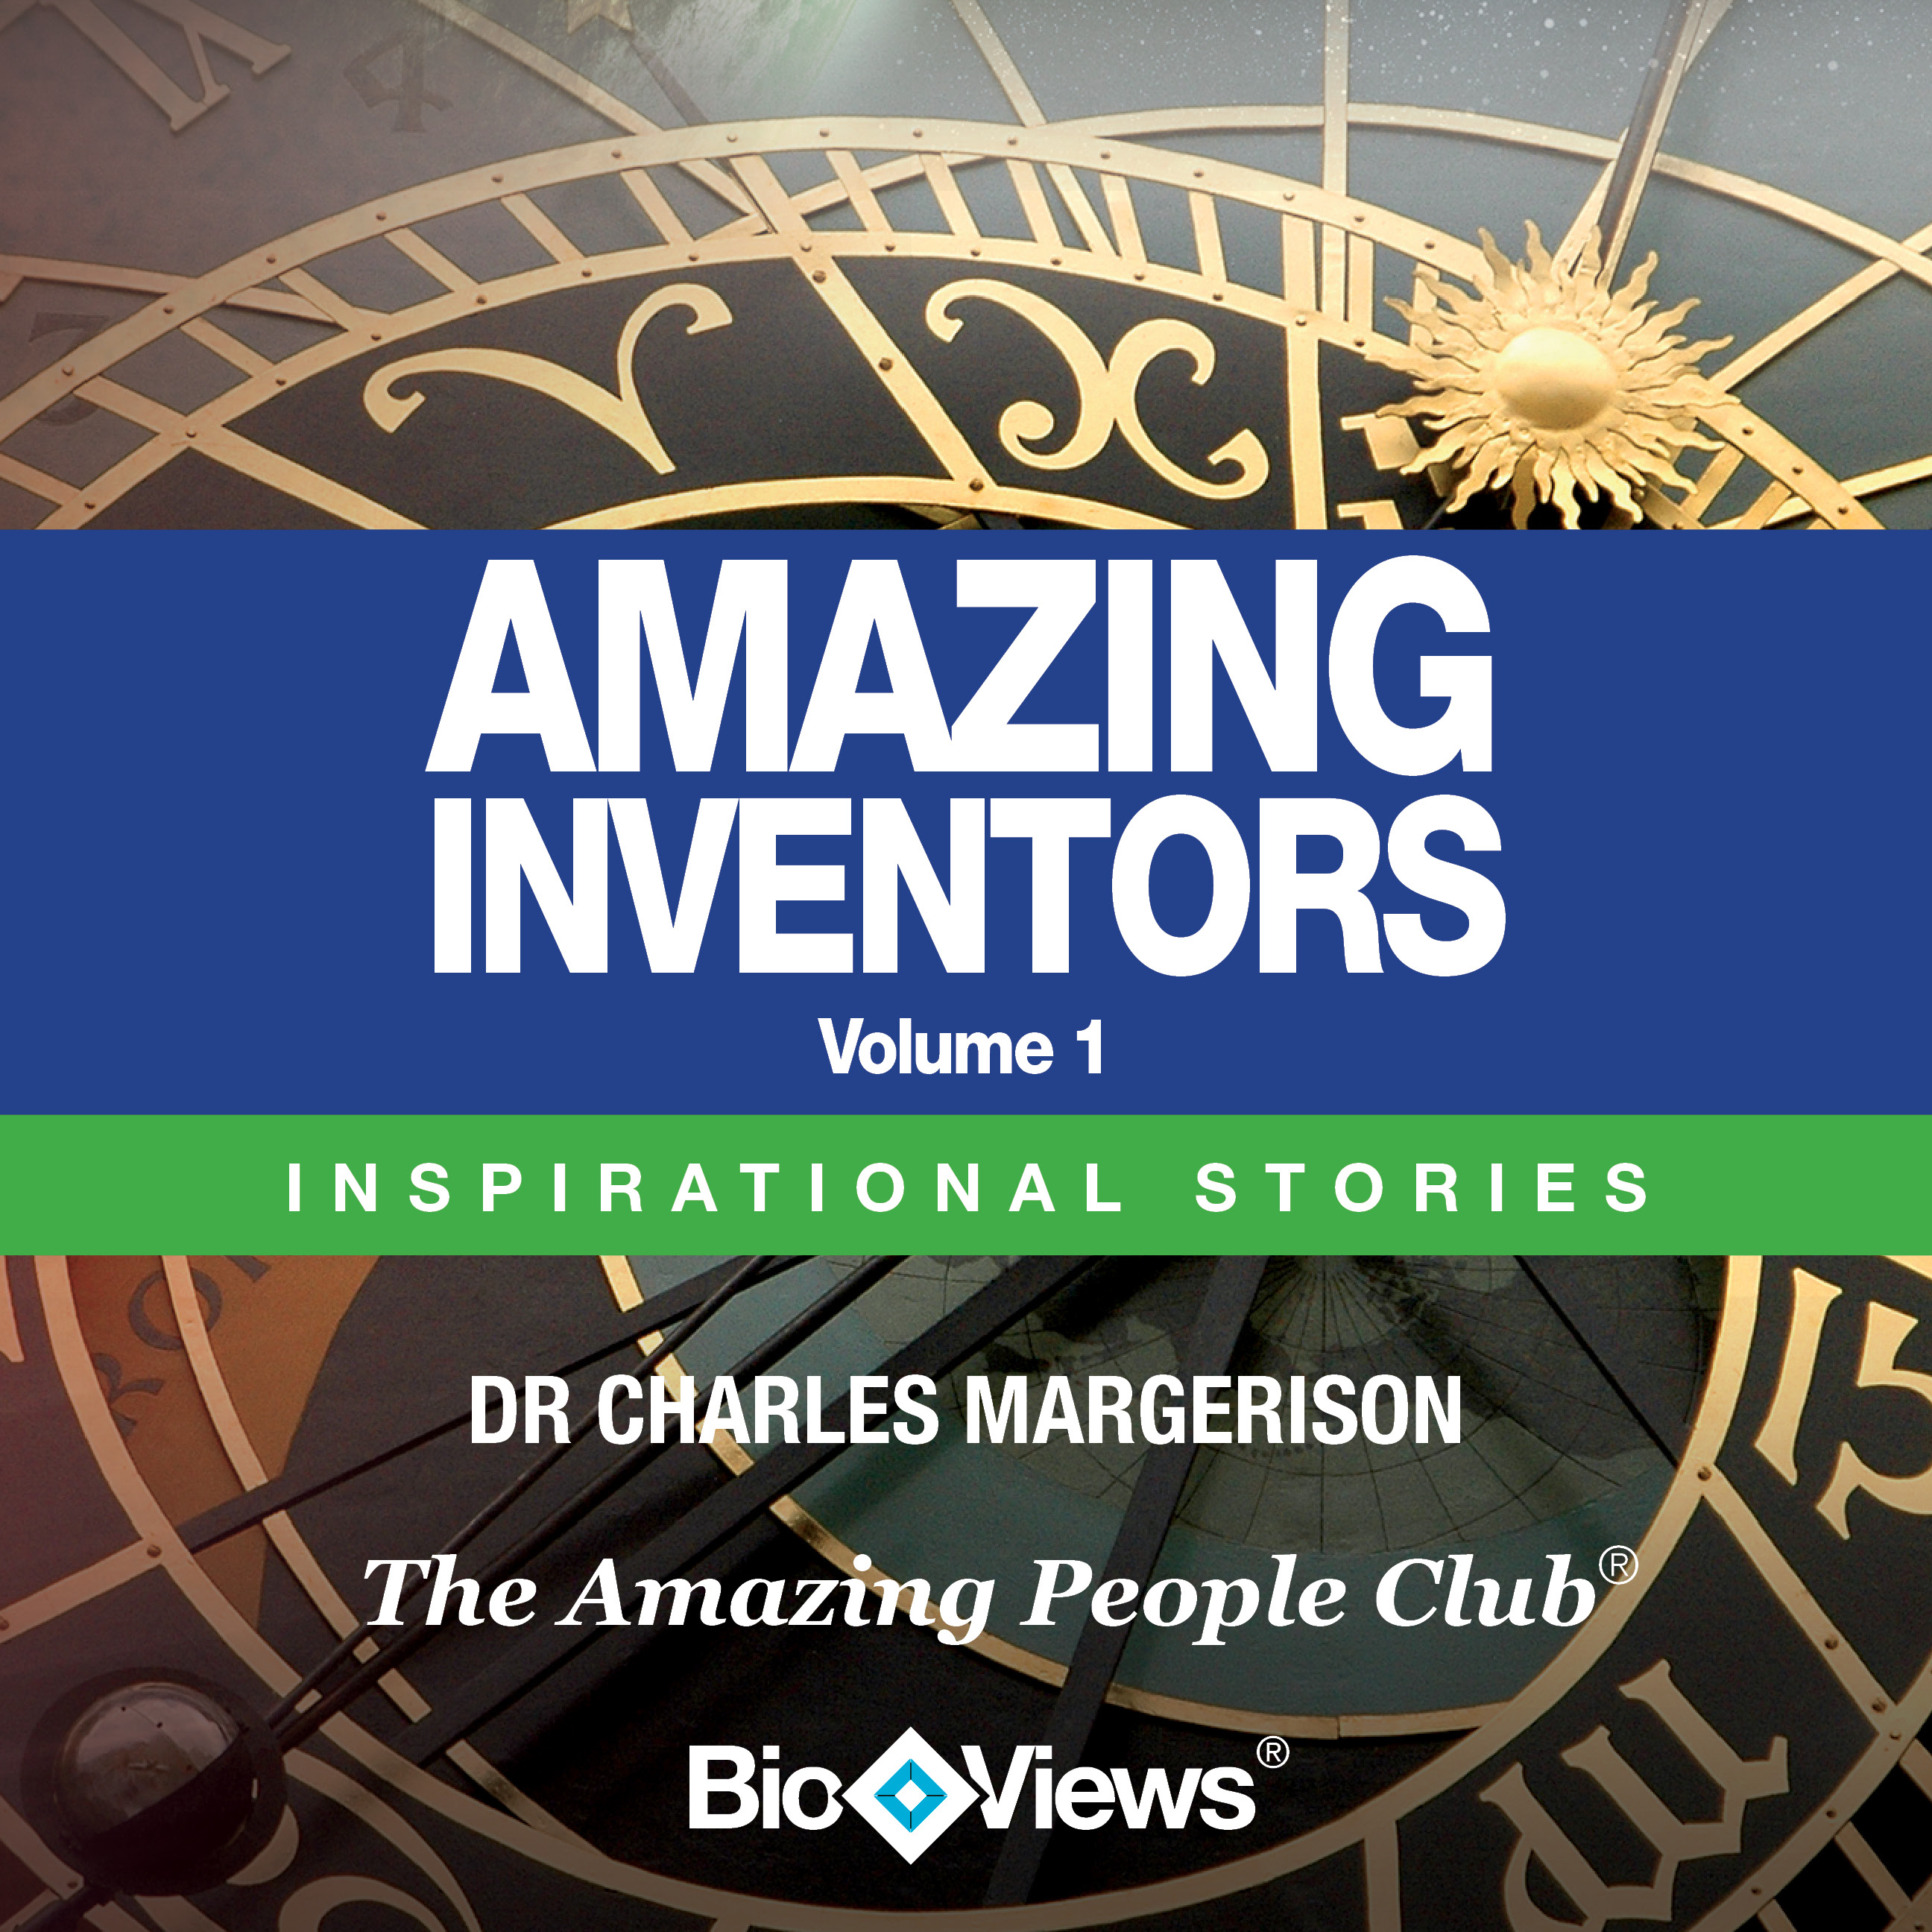 Amazing Inventors, Vol. 1: Inspirational Stories Audiobook, by Charles Margerison